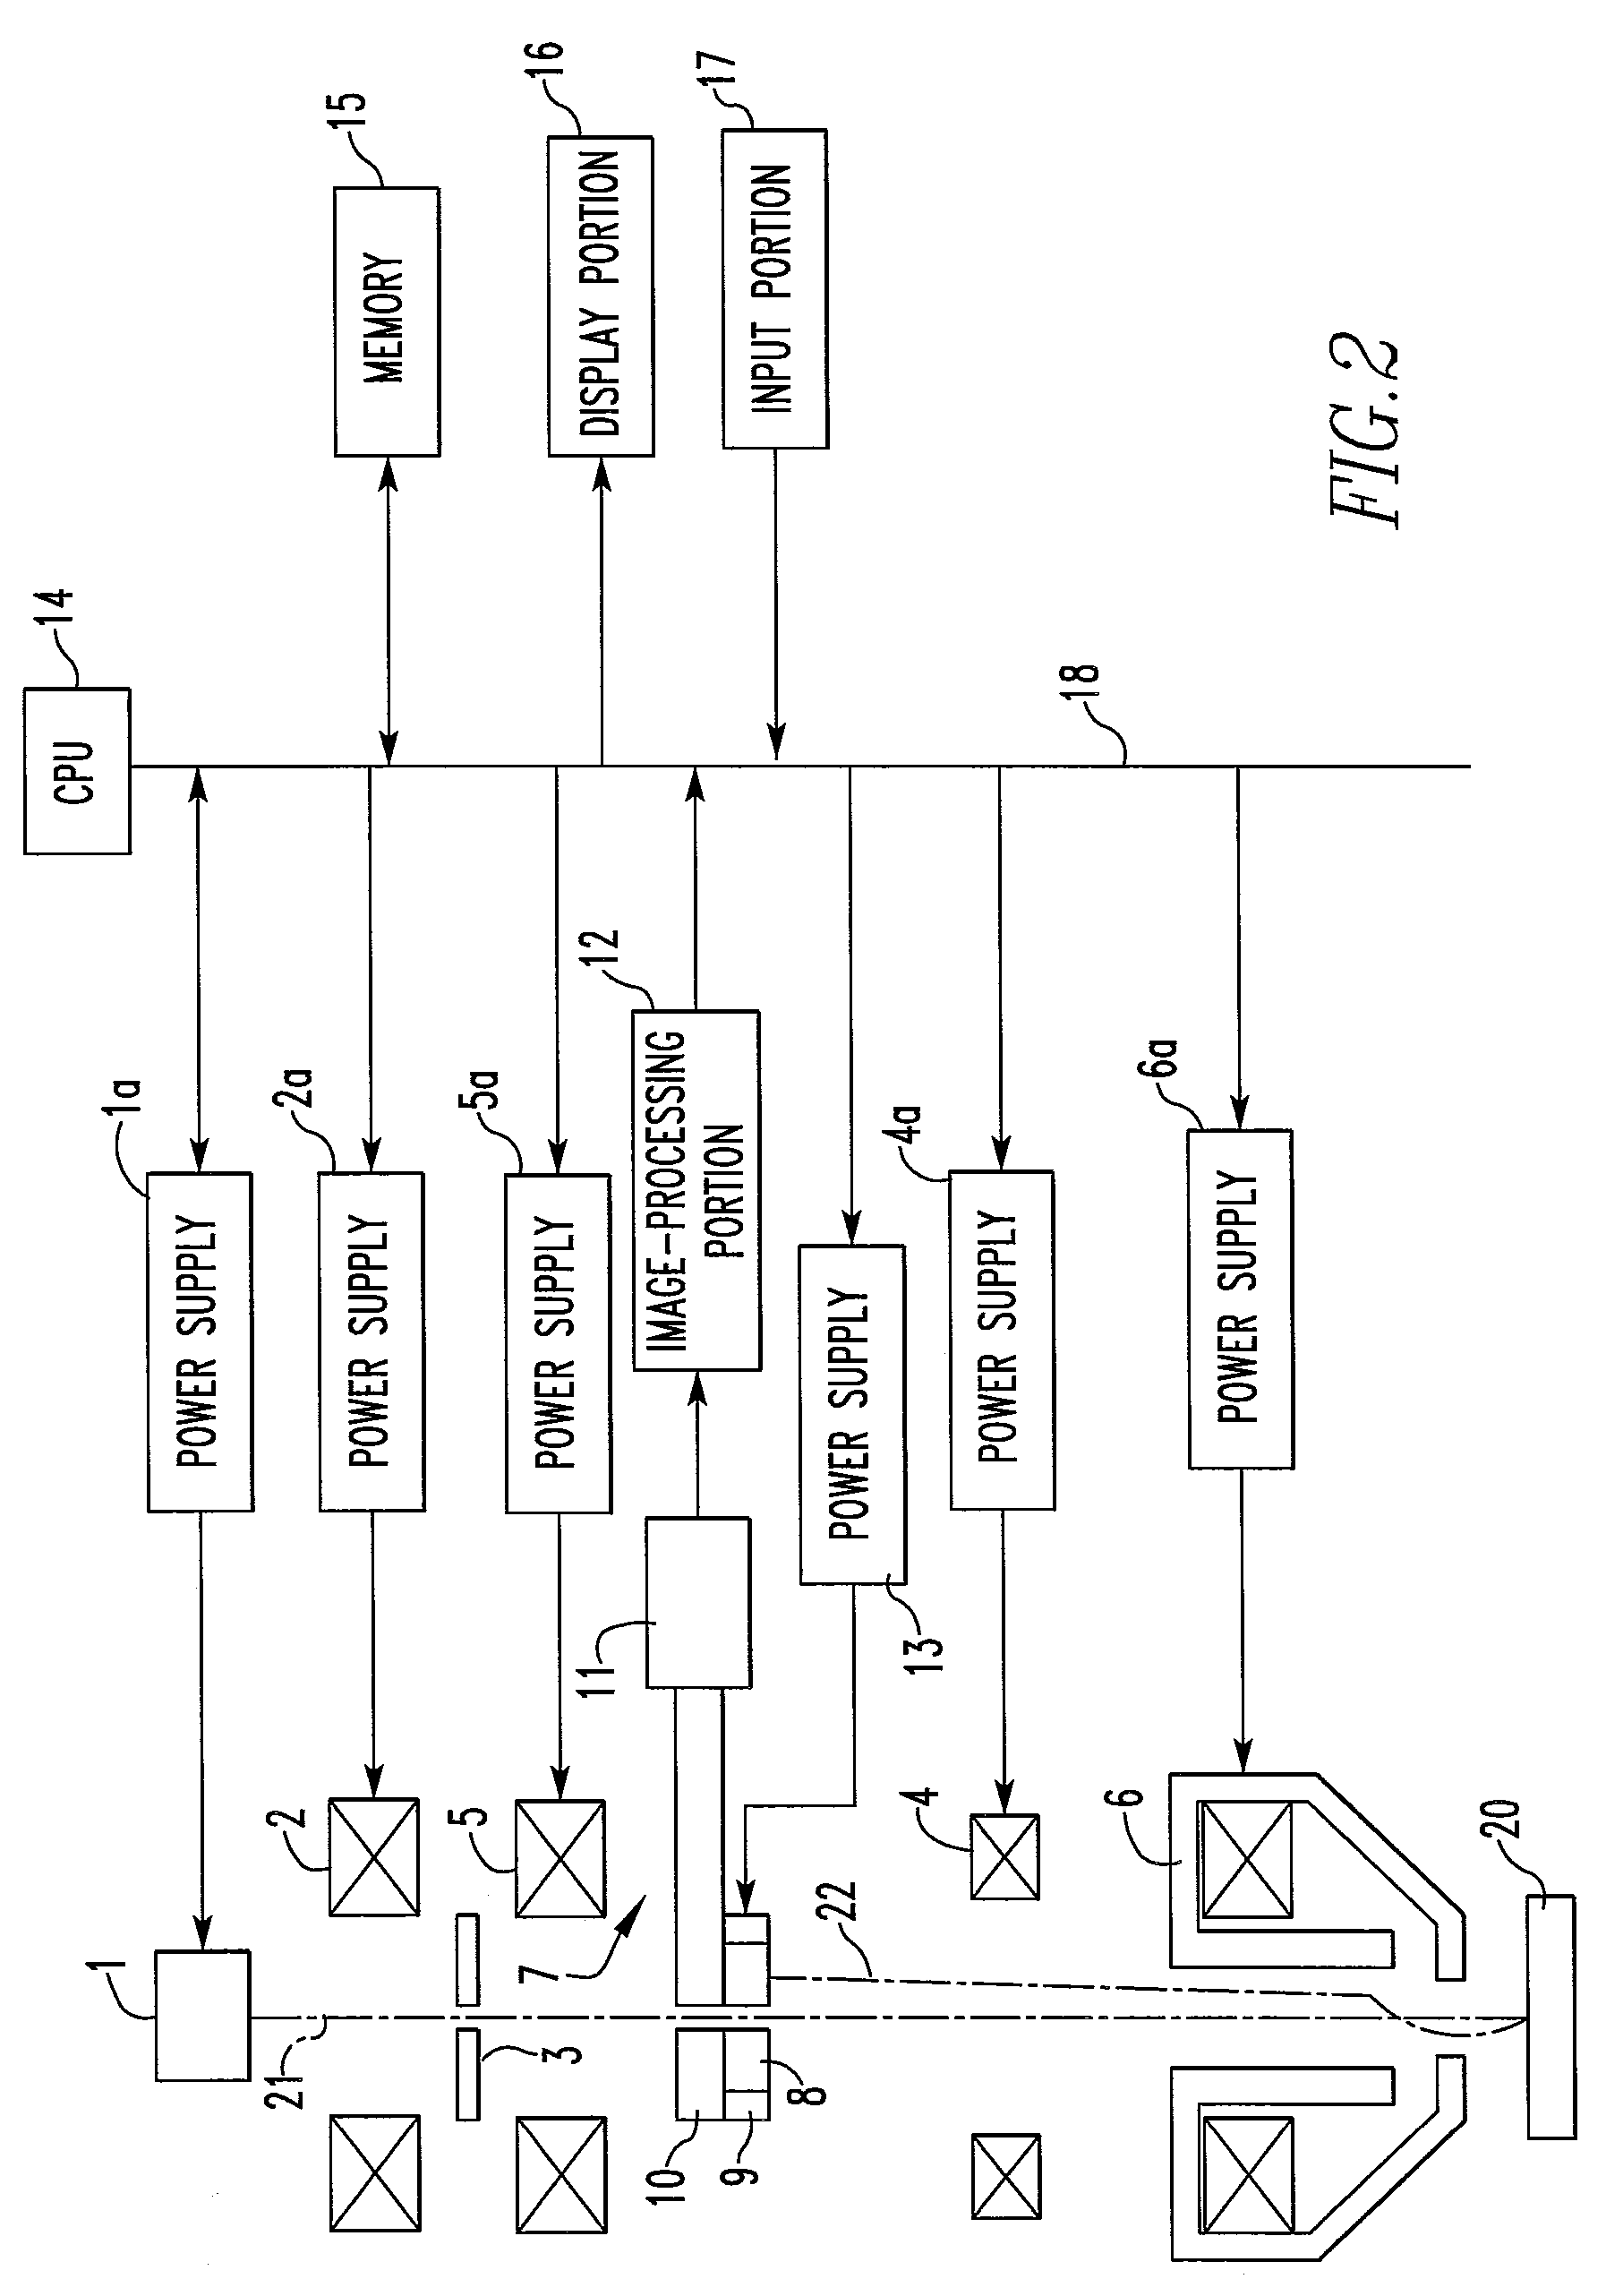 Electron beam apparatus and method of operating the same